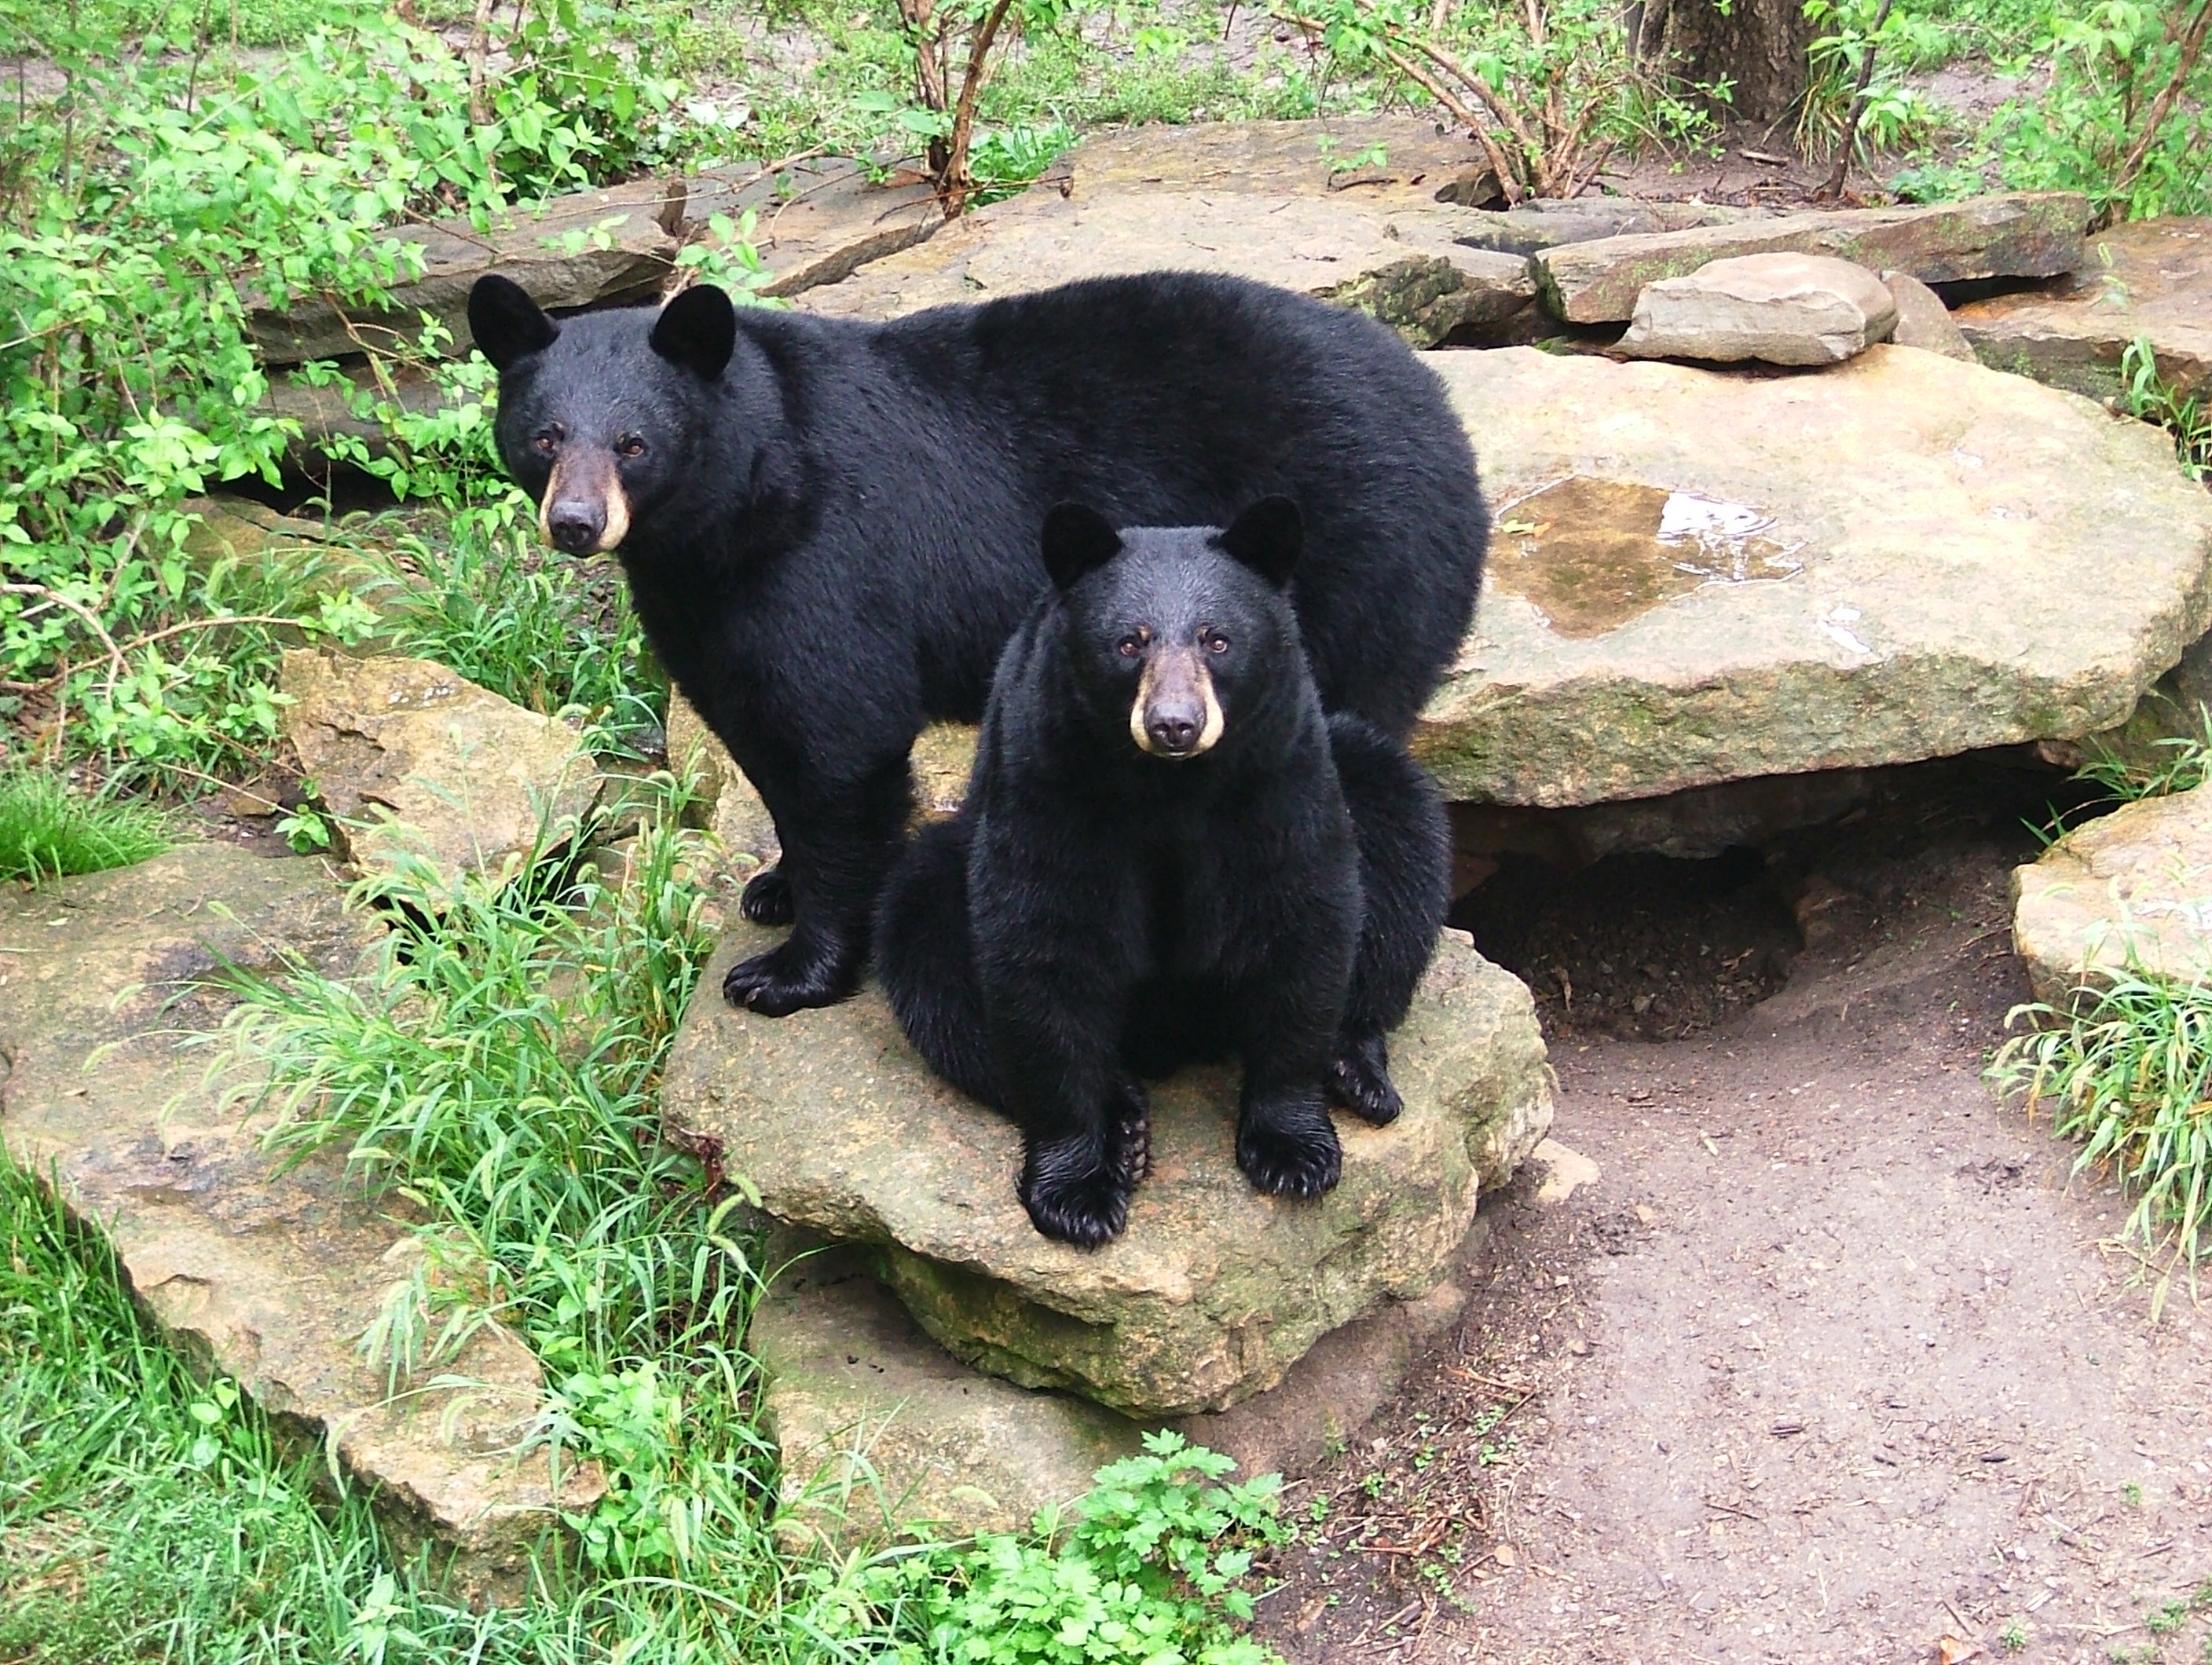 Sneak and Peak, the first bears to reside in Hills Black Bear Woods, which opened in 1996.